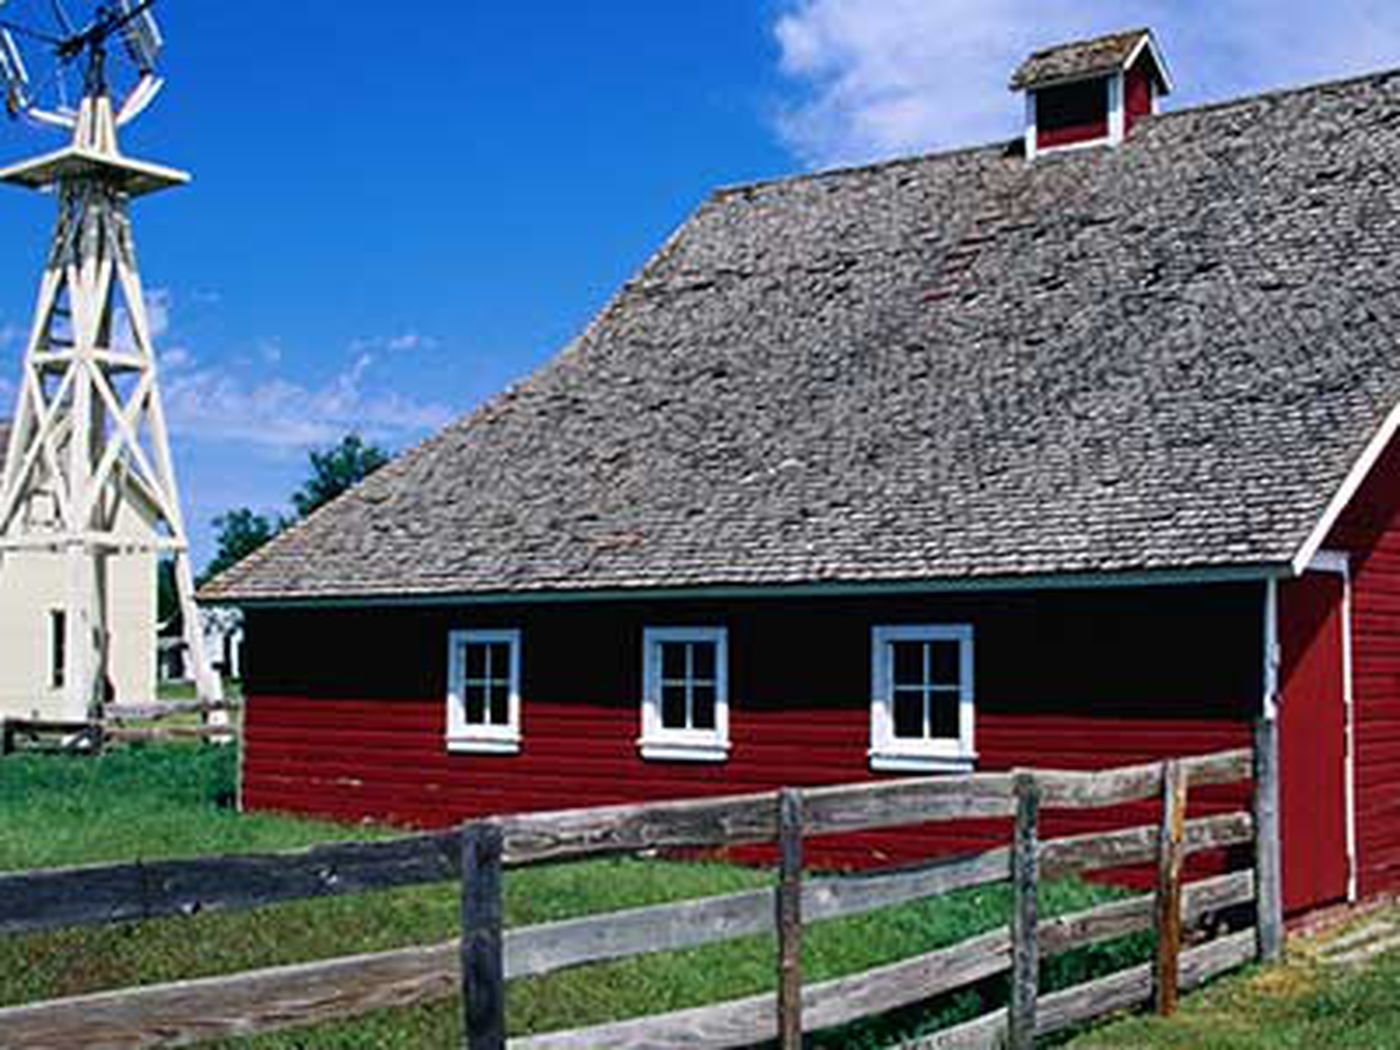 Why Barns are Red and More Paint Color Cues Old House